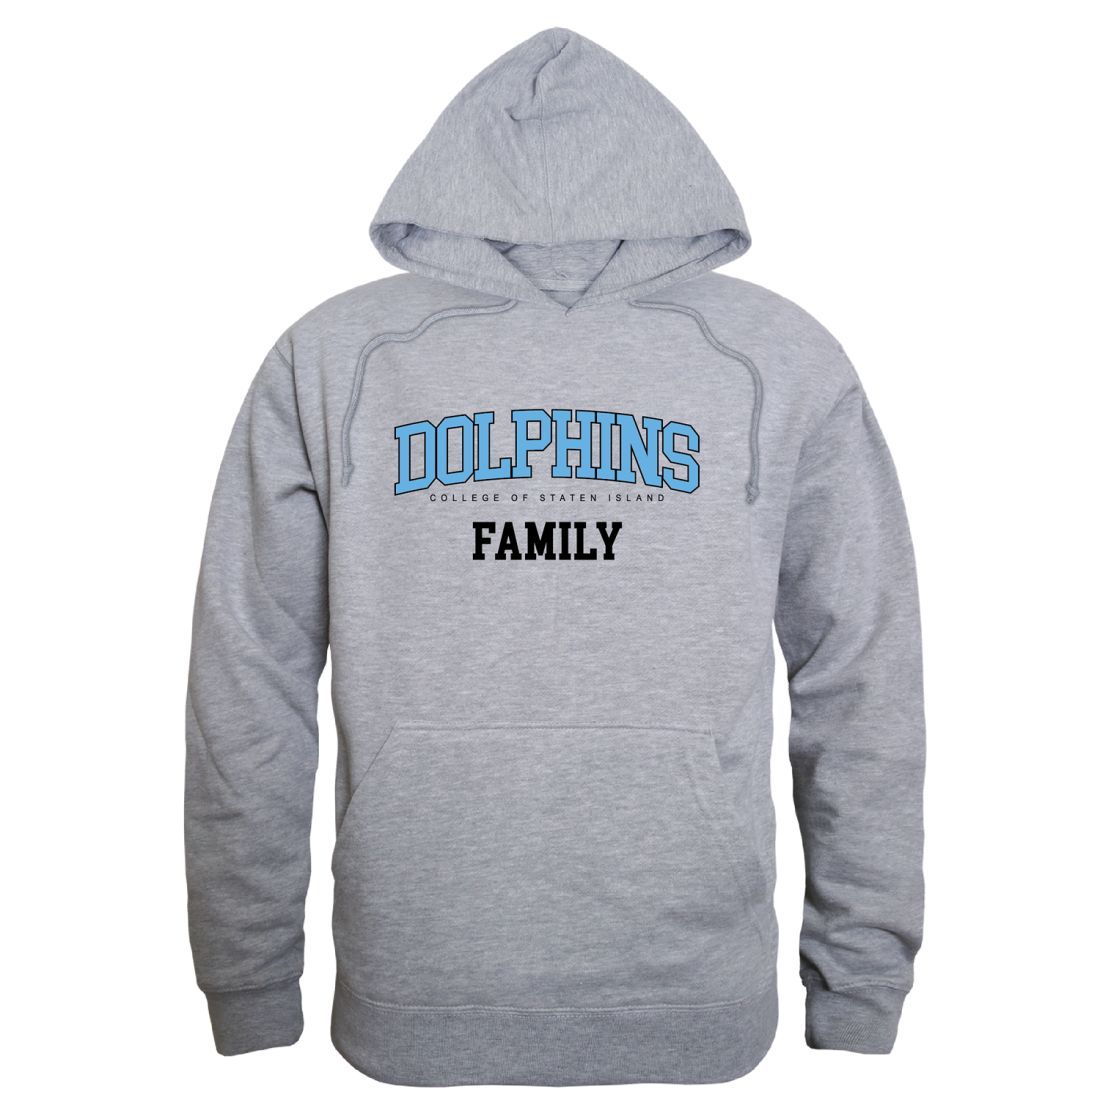 CUNY College of Staten Island Dolphins Family Hoodie Sweatshirts